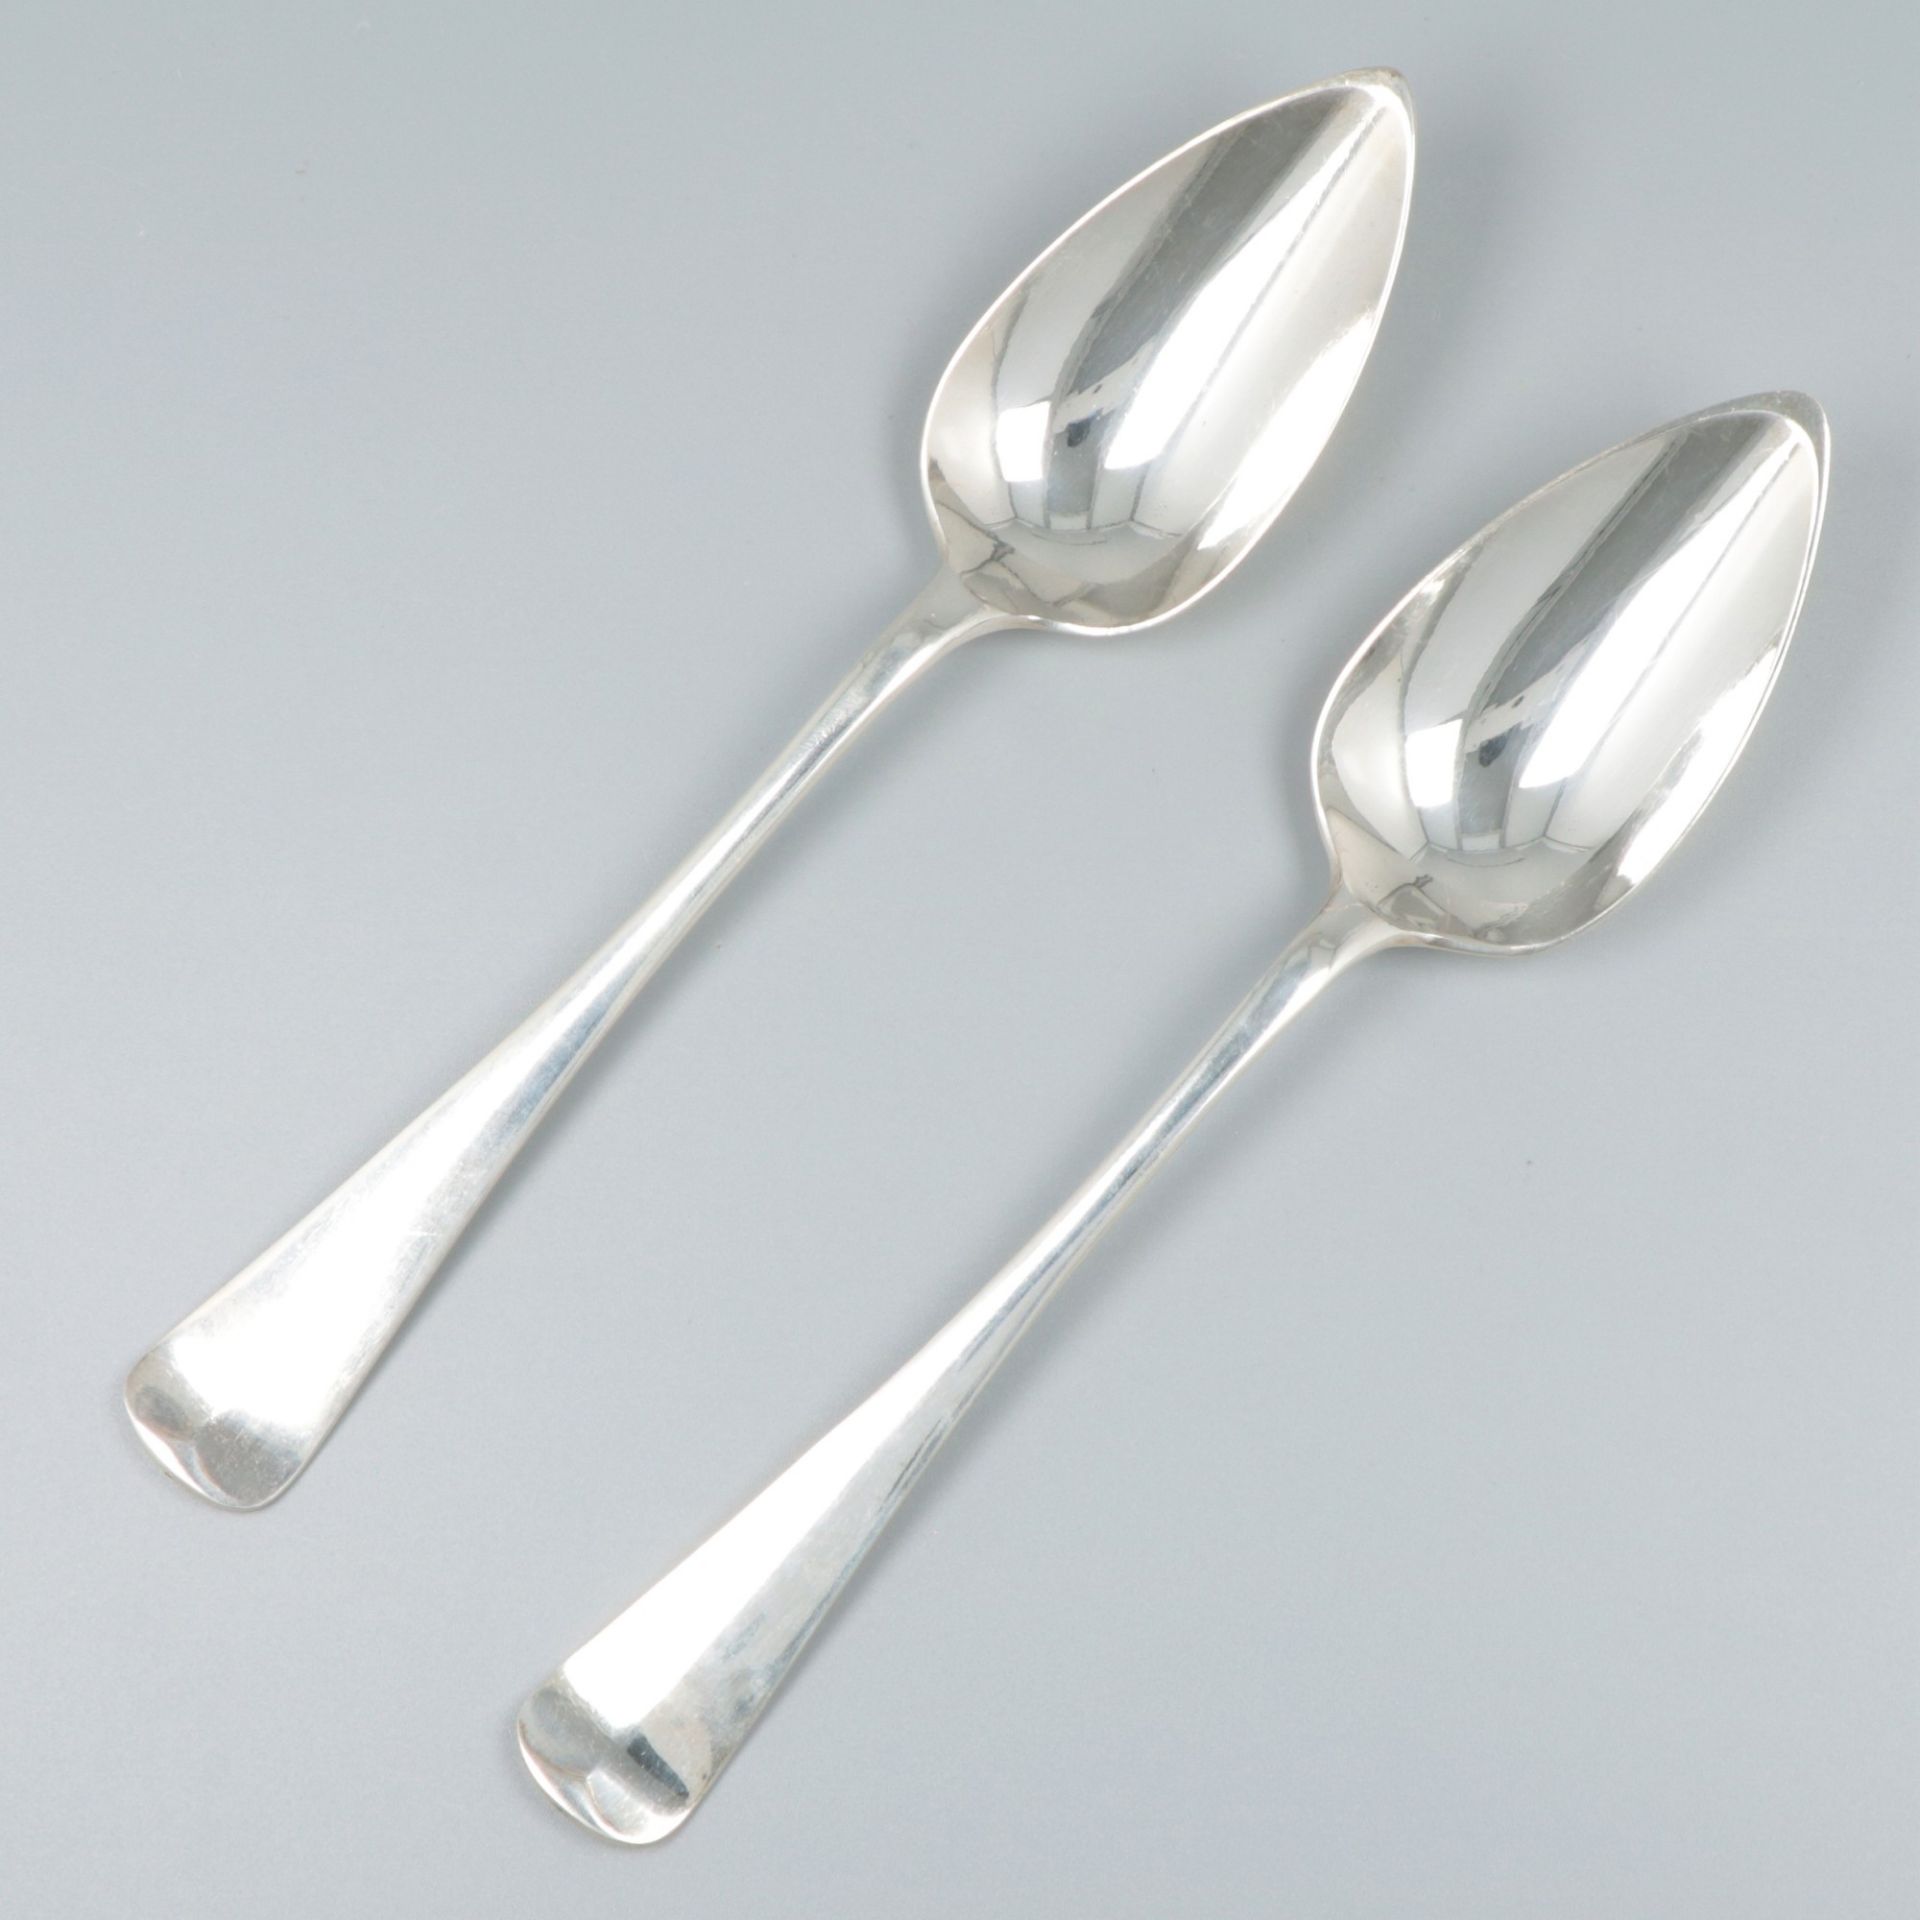 6-piece set dinner spoons "Haags Lofje", silver. - Image 2 of 6